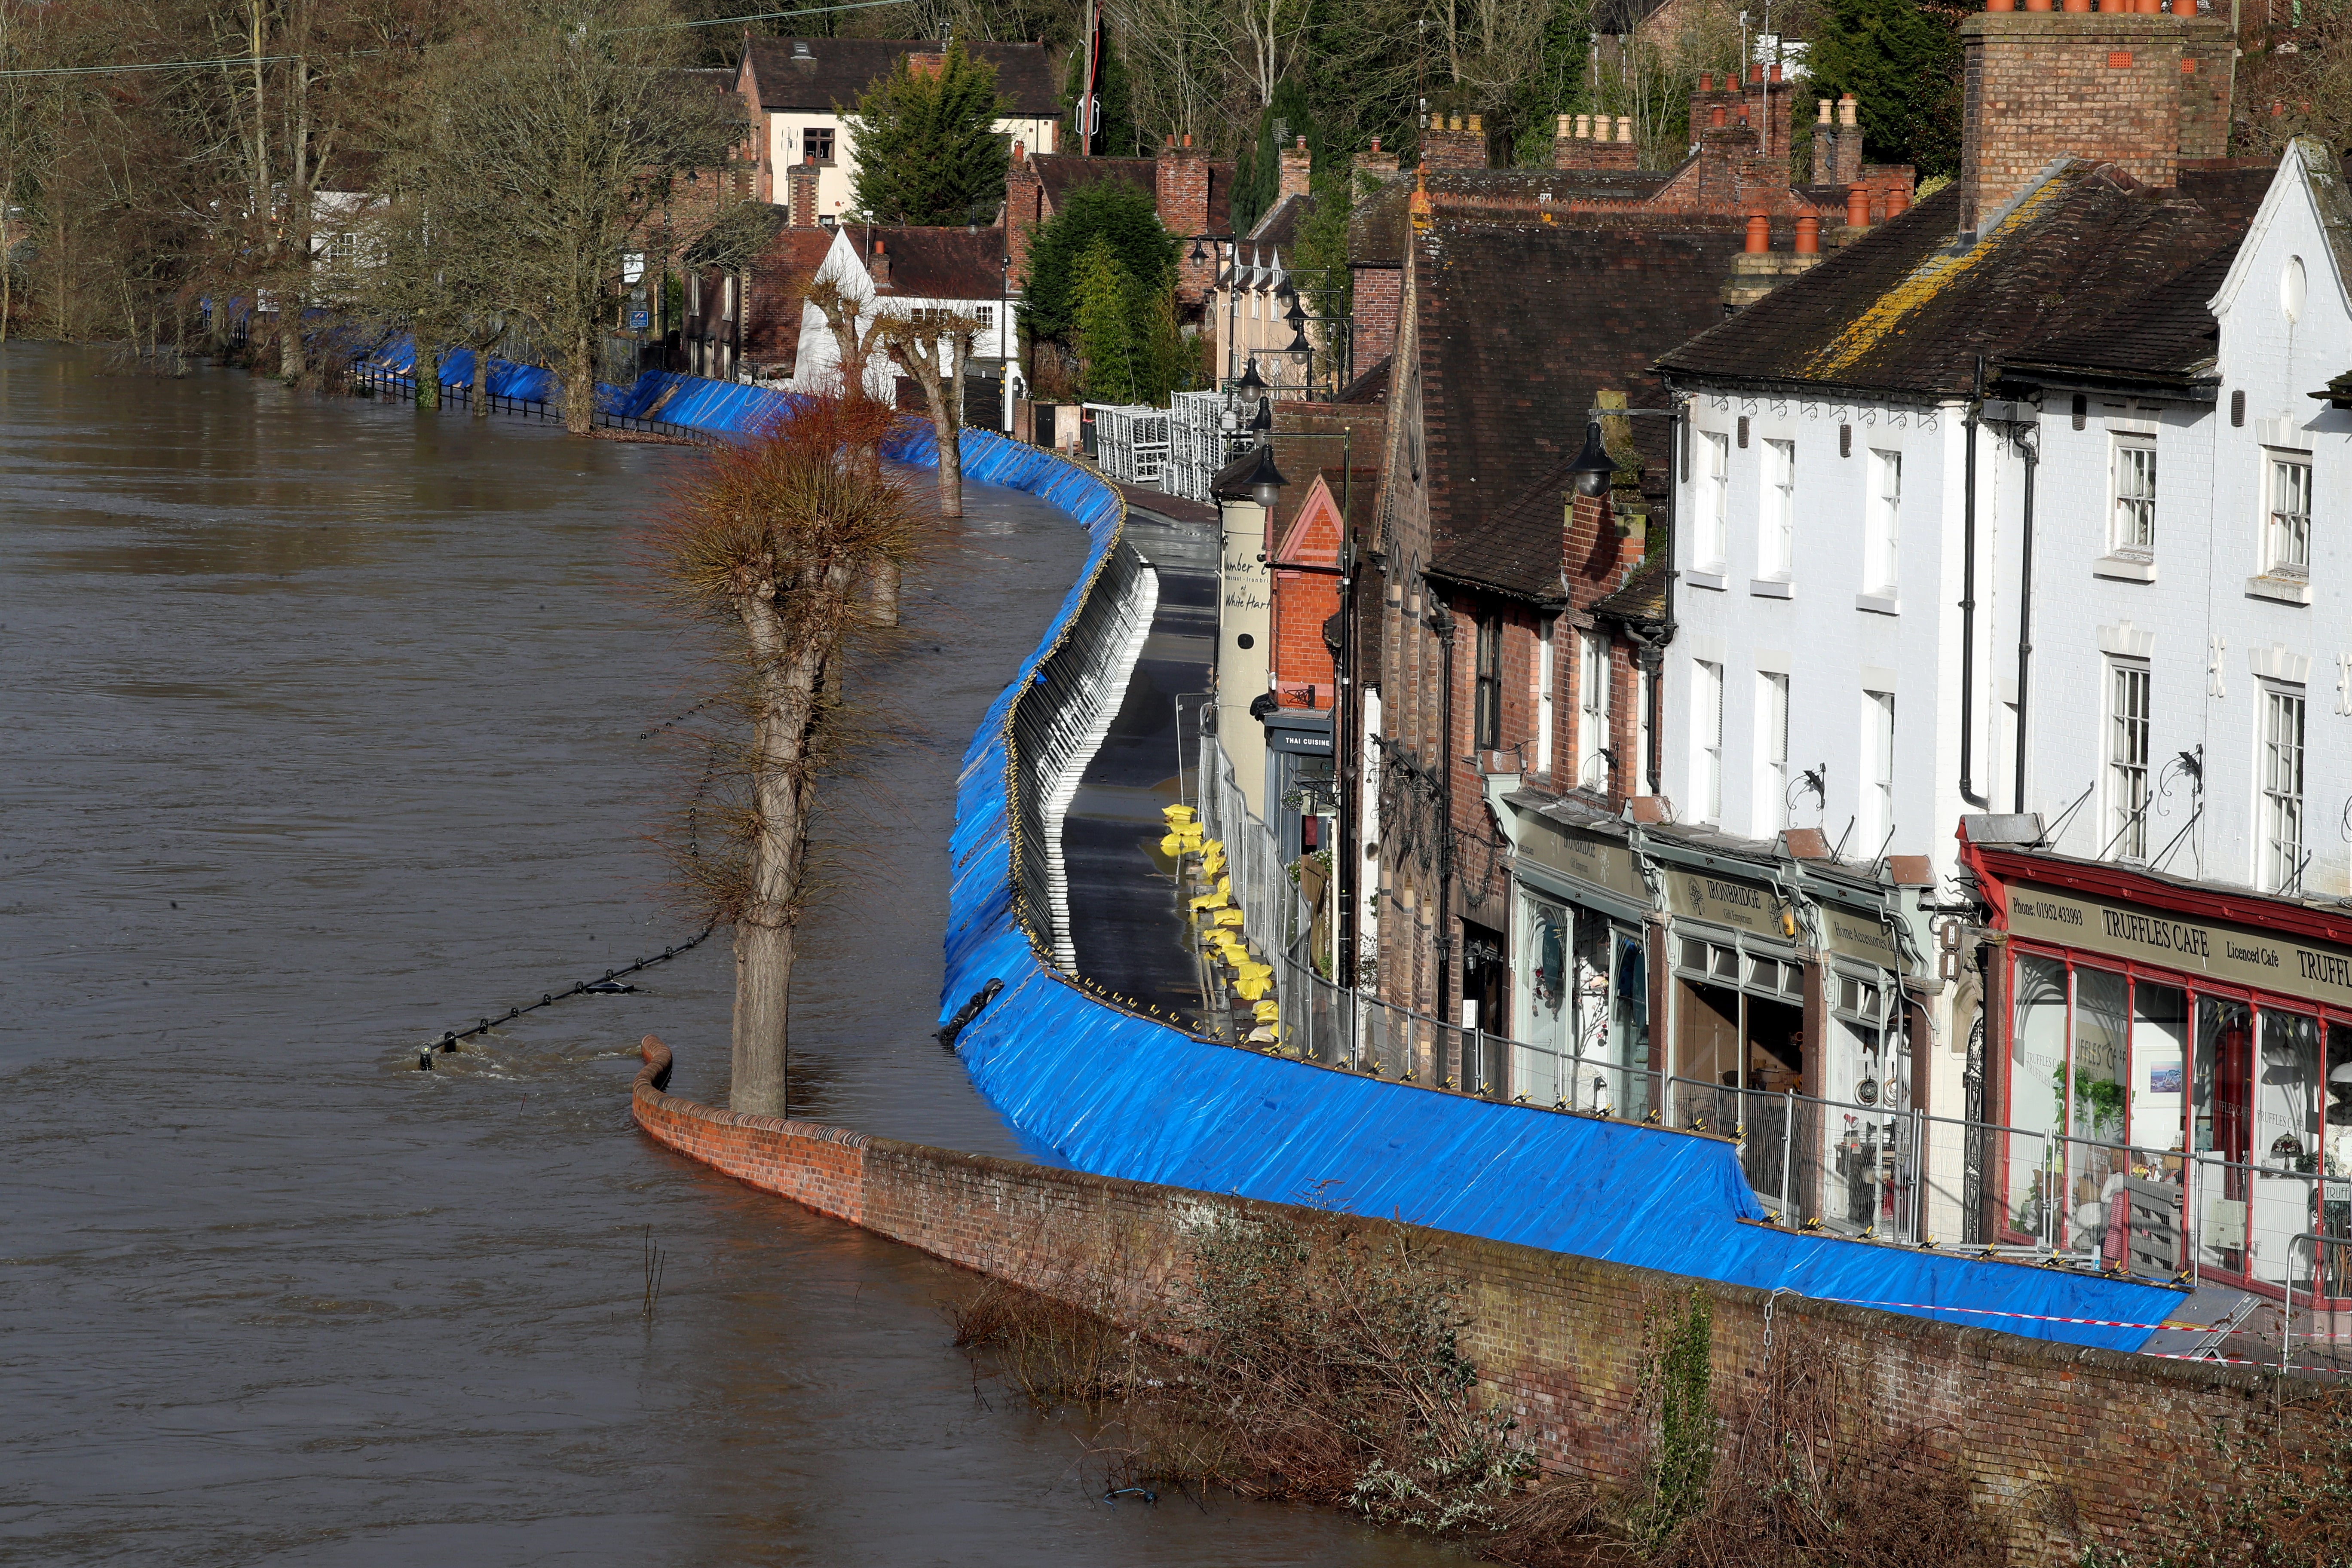 Flood defences along the Wharfage next to the River Severn following high winds and wet weather in Ironbridge, Shropshire